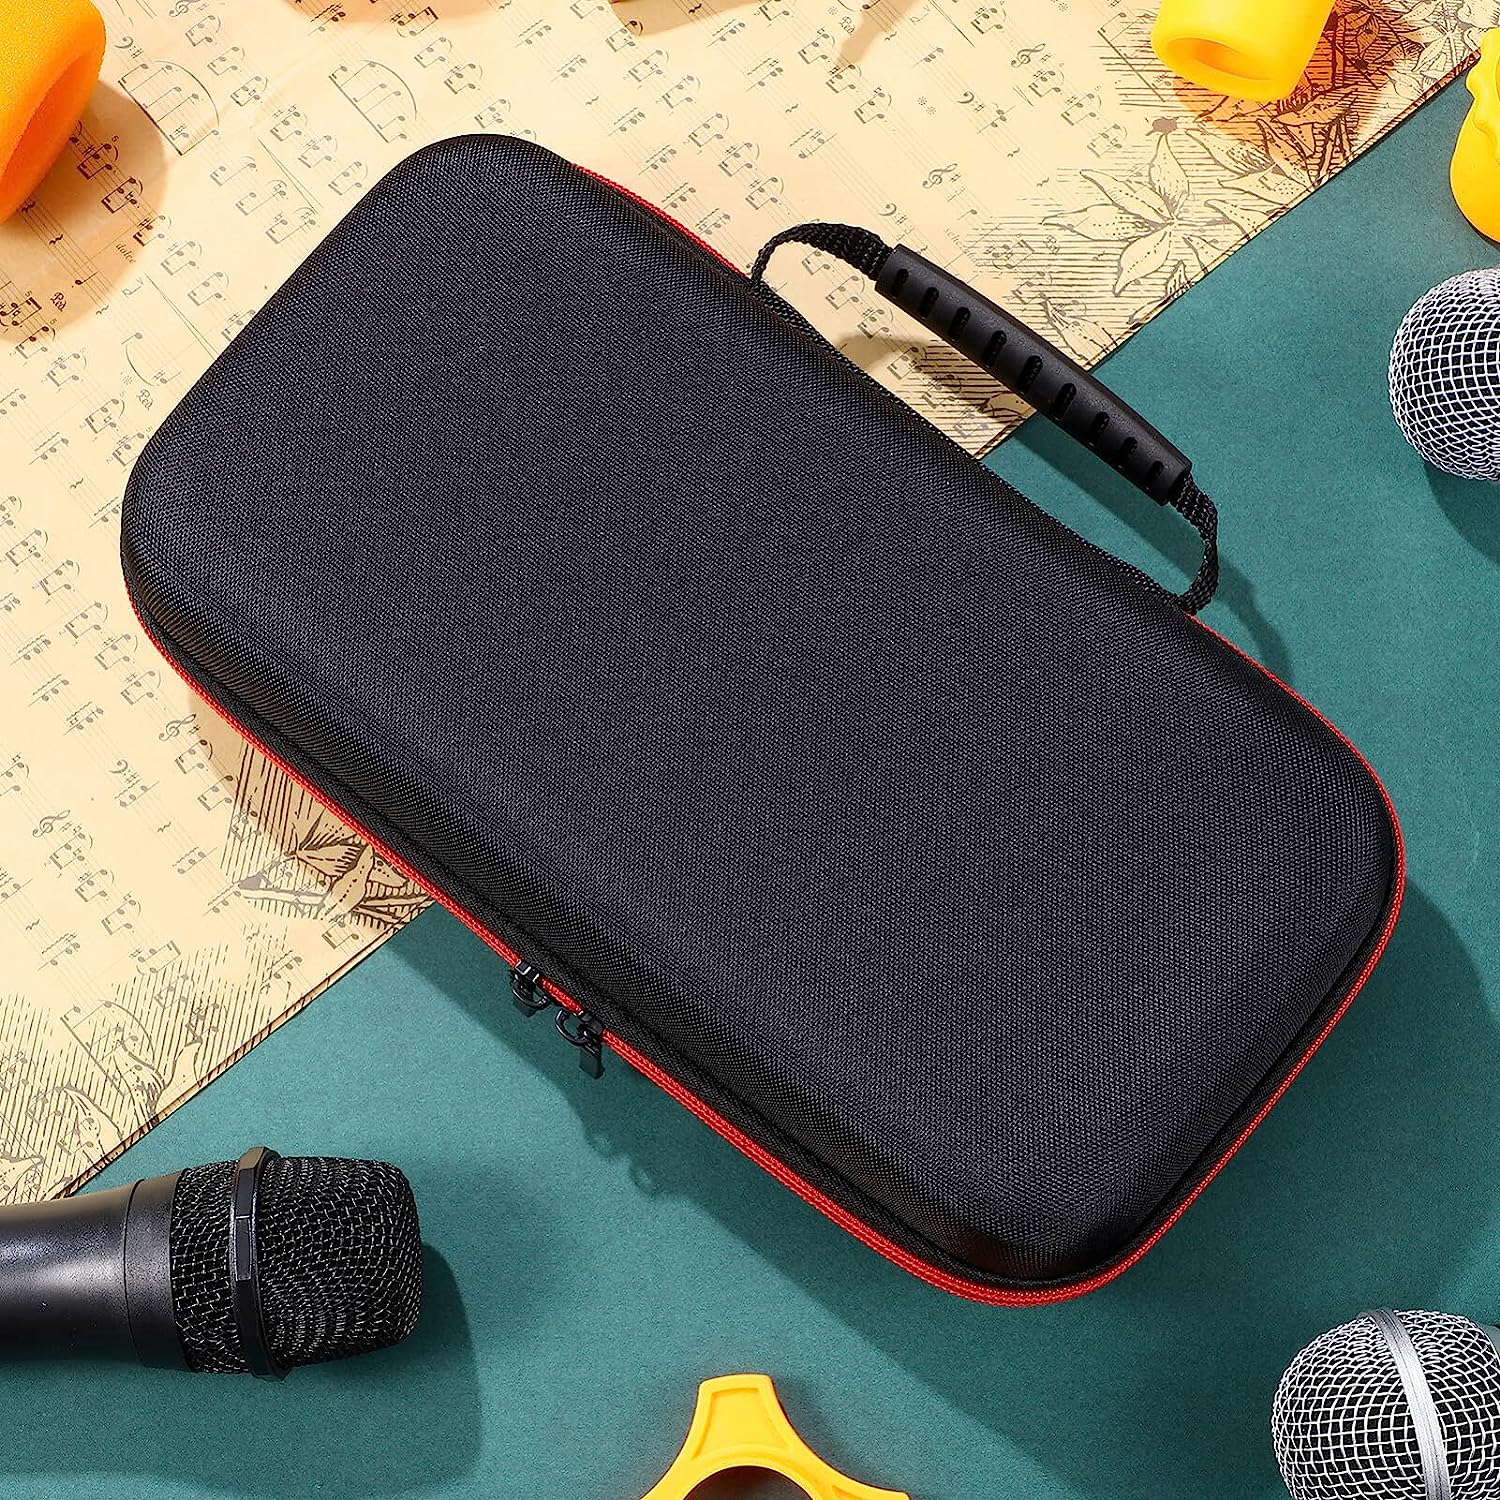 Ciieeo Wireless Microphone Case Mic Storage Carrying Bag for 2 Handheld Microphones Hard EVA Case with Zipper for Travel Outdoor